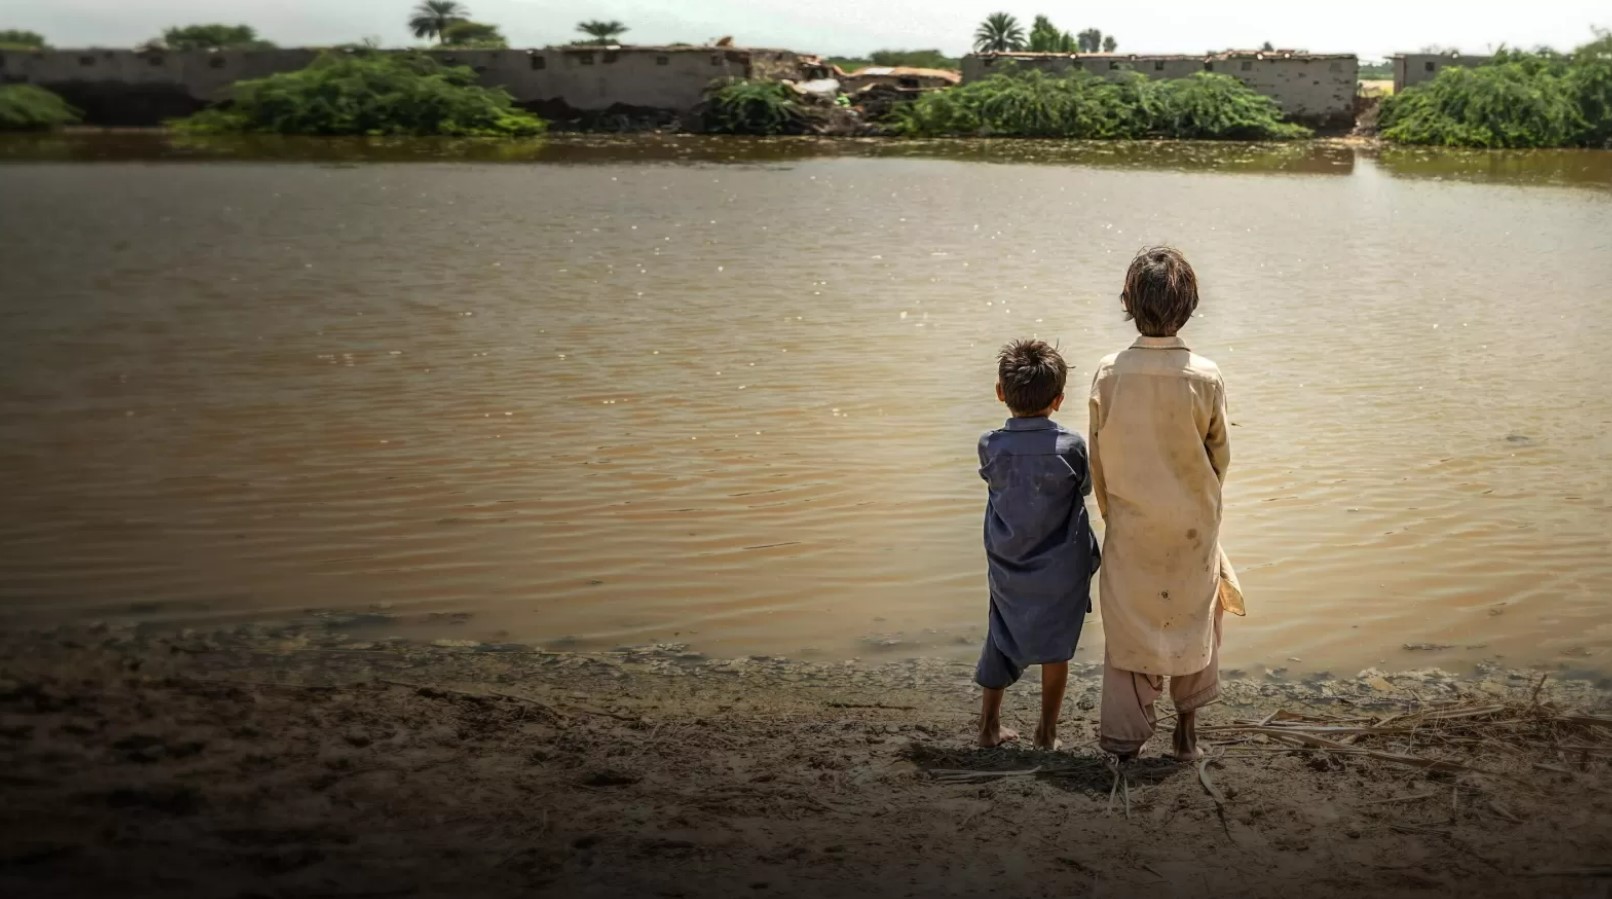 Two children looking out over a muddy lake